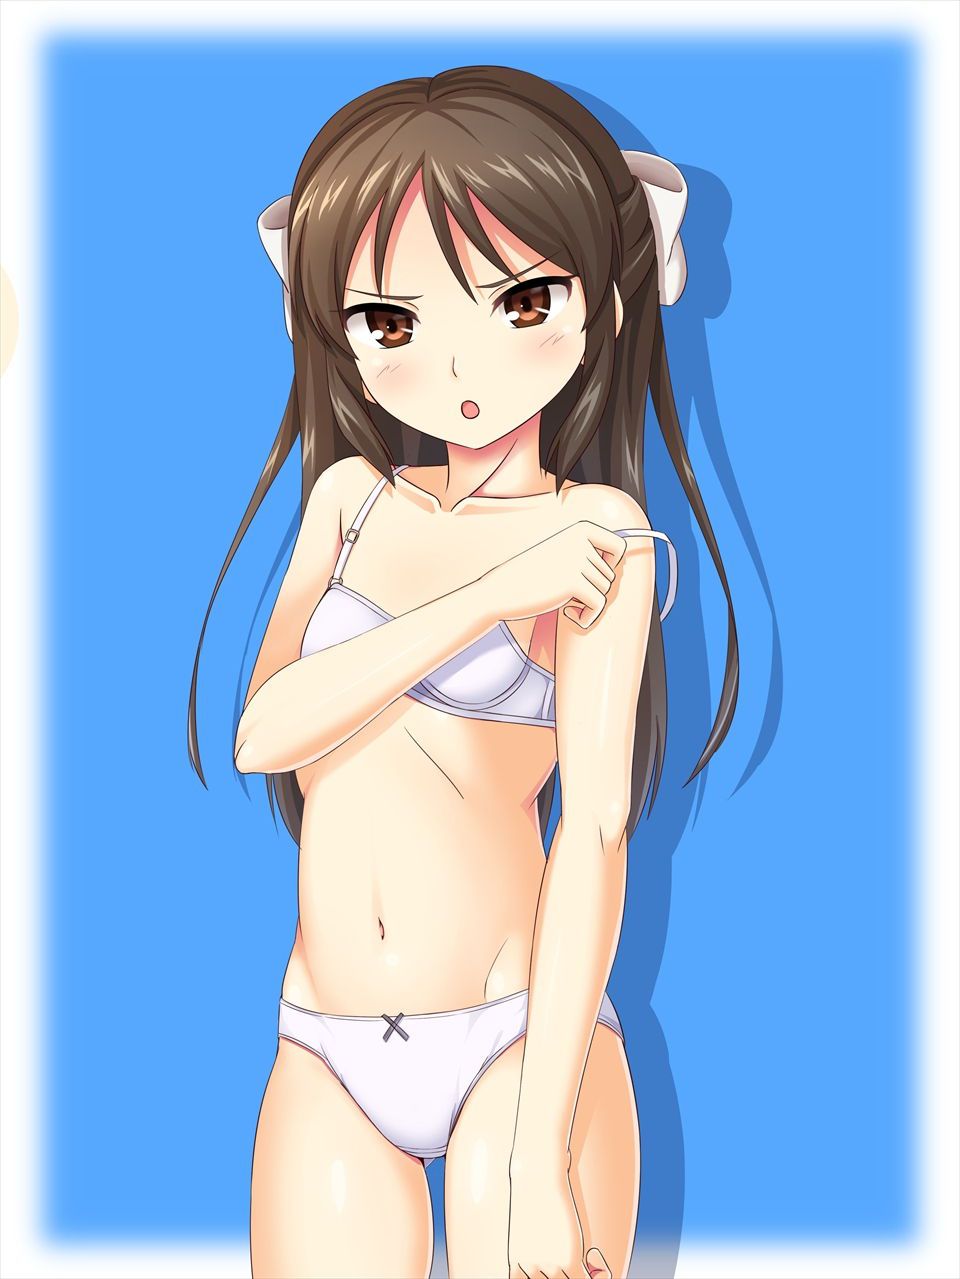 [39 pieces] I take an eroticism image having a cute the youth shorts & youth bra which is suitable for age of ガチ primary schoolchild Lolly Arisu Tachibana of デレマス! 9